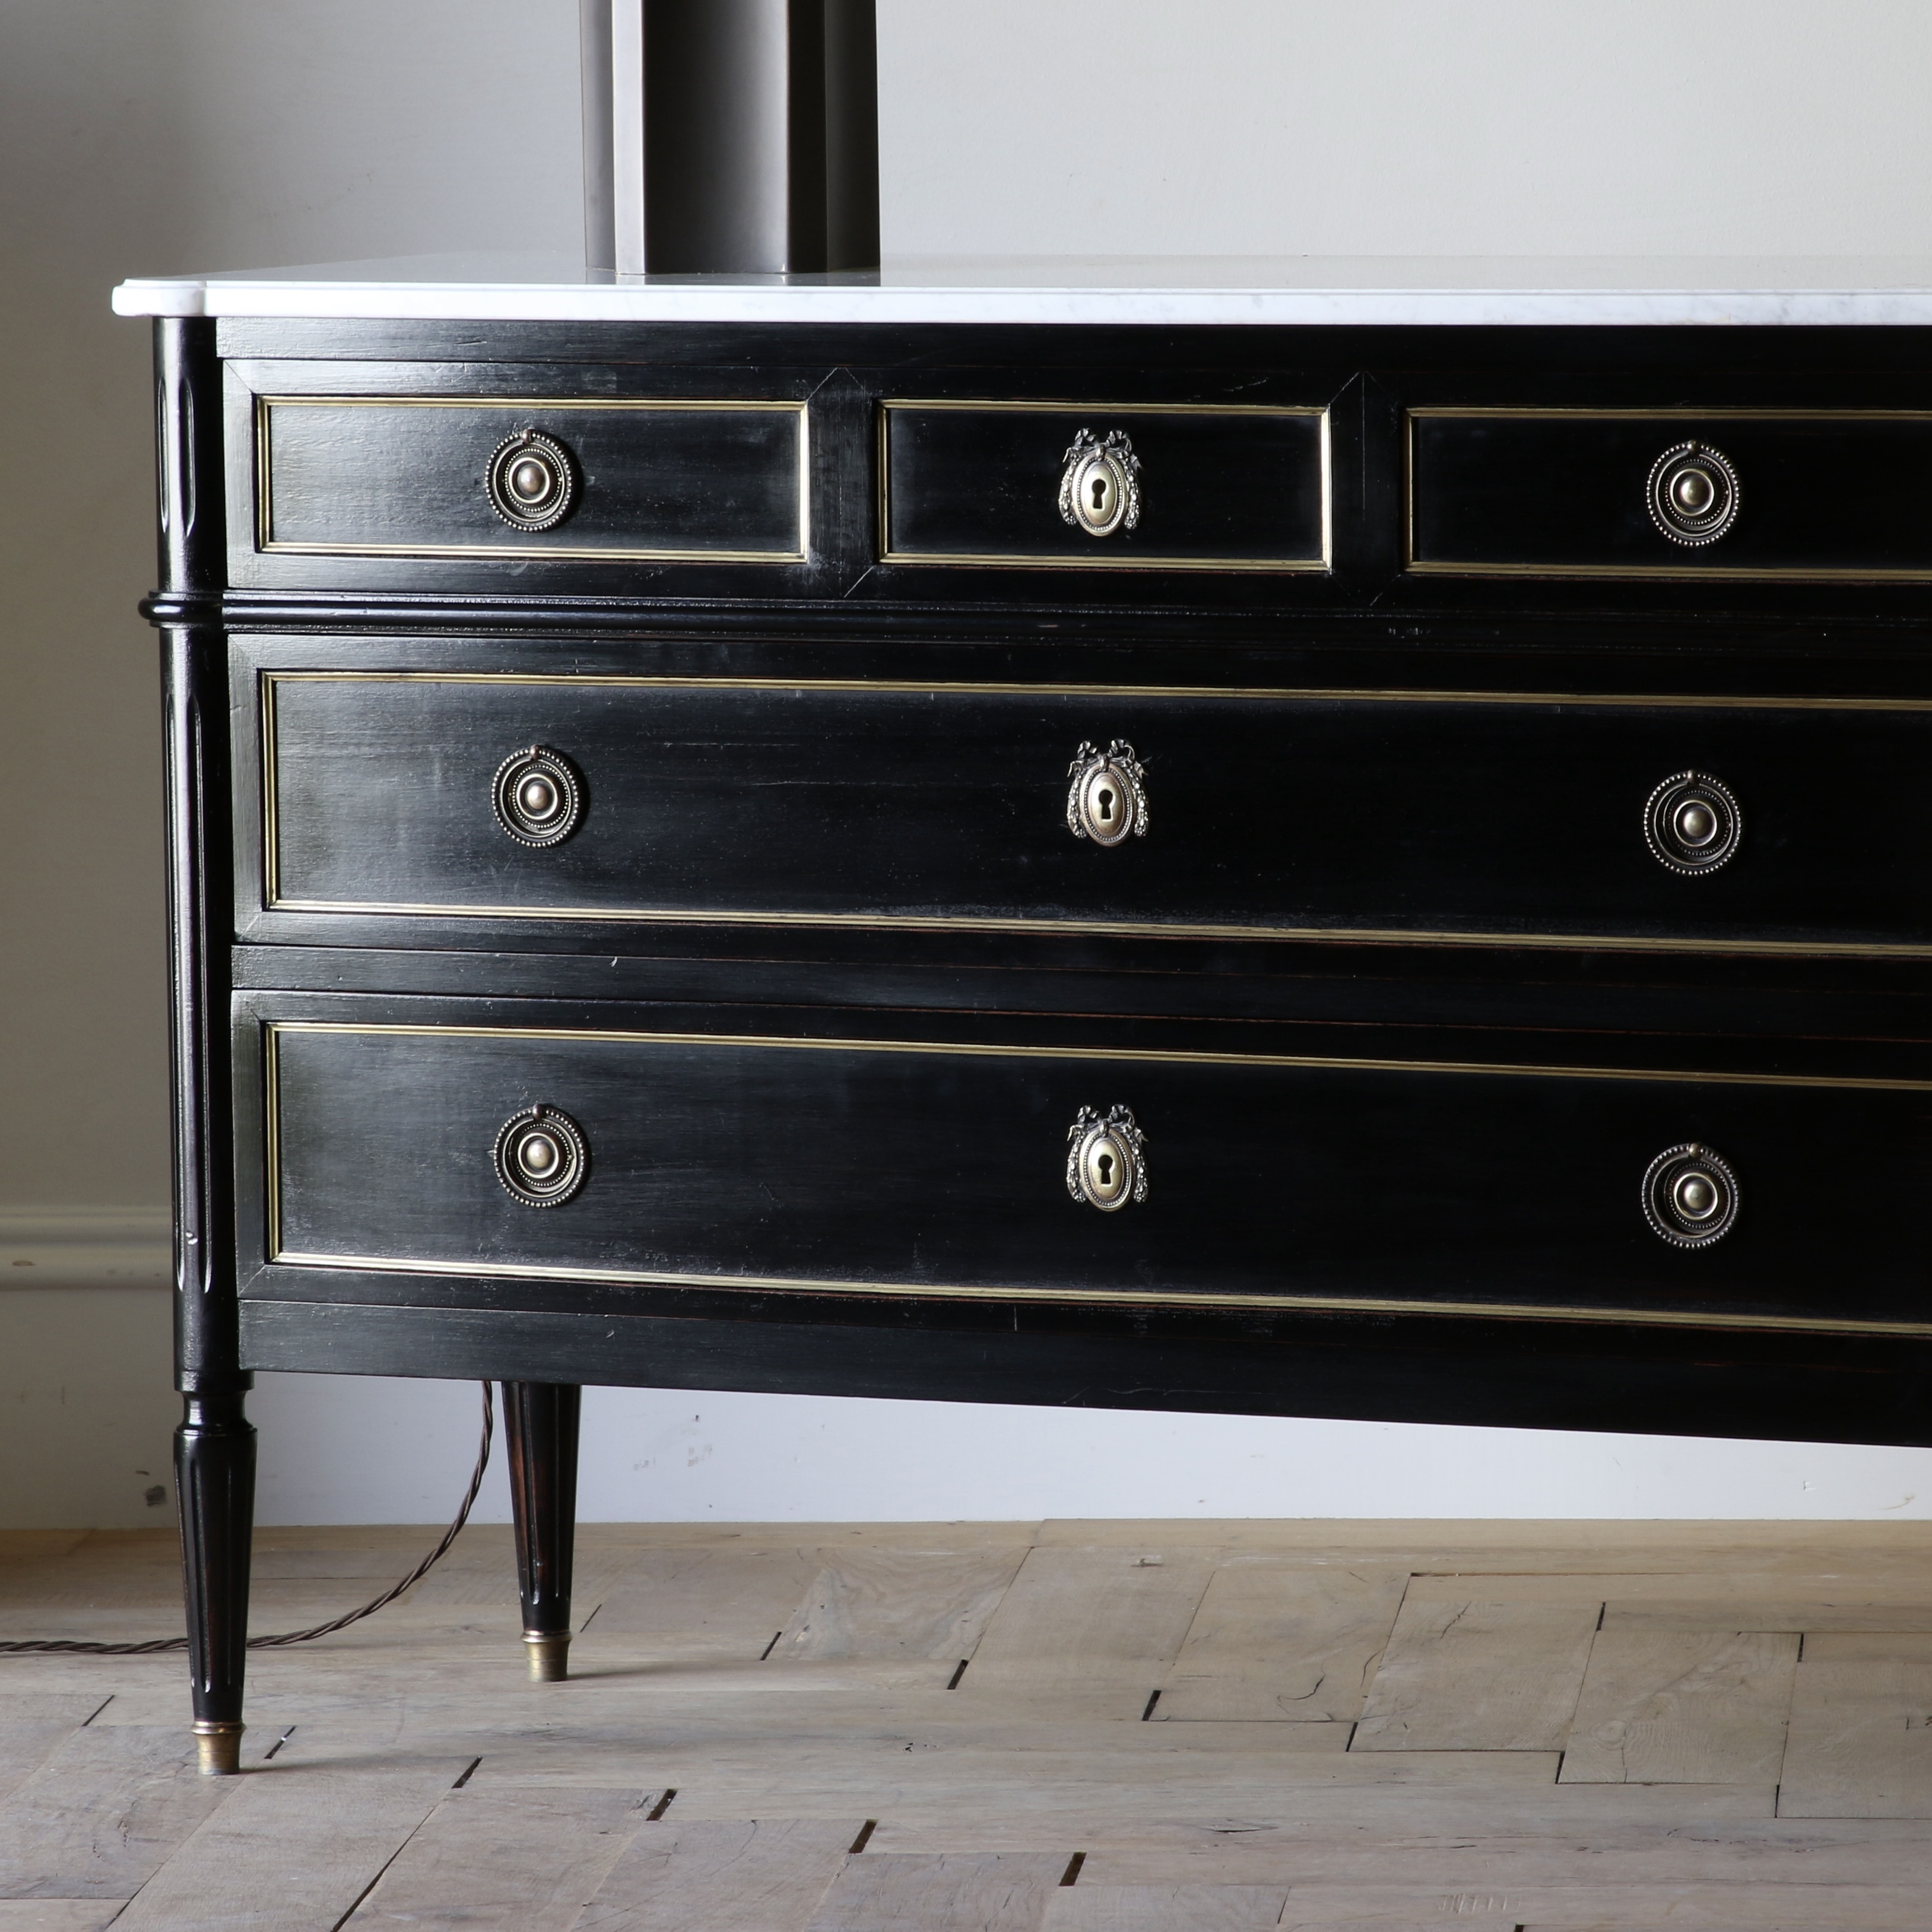 Louis XVI Chest of Drawers